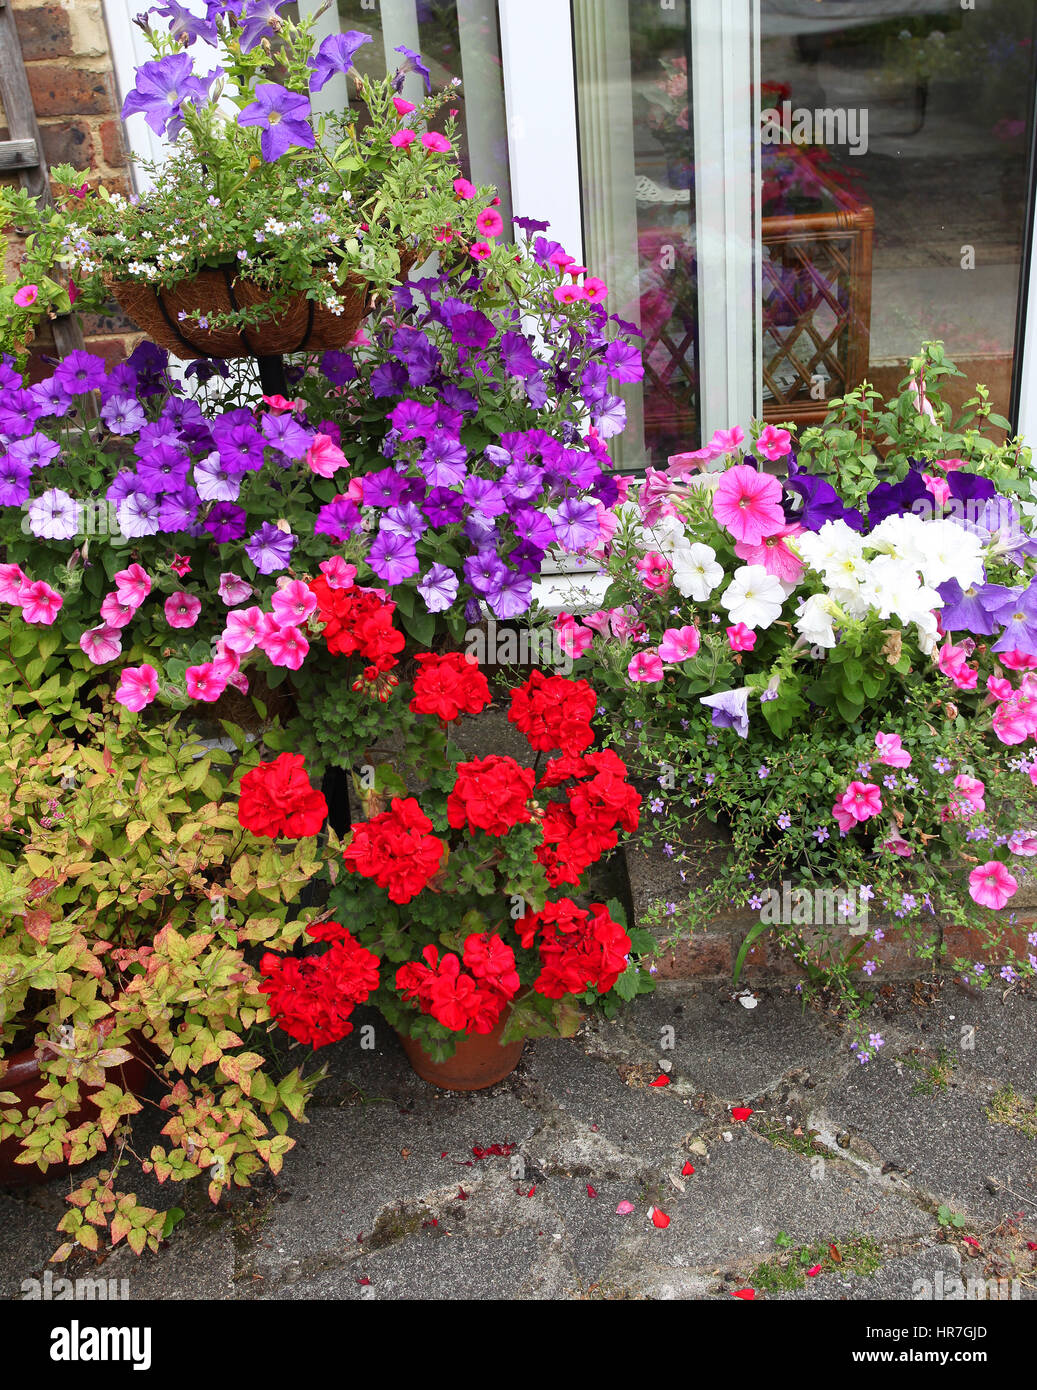 Colourful display of summer bedding plants Stock Photo